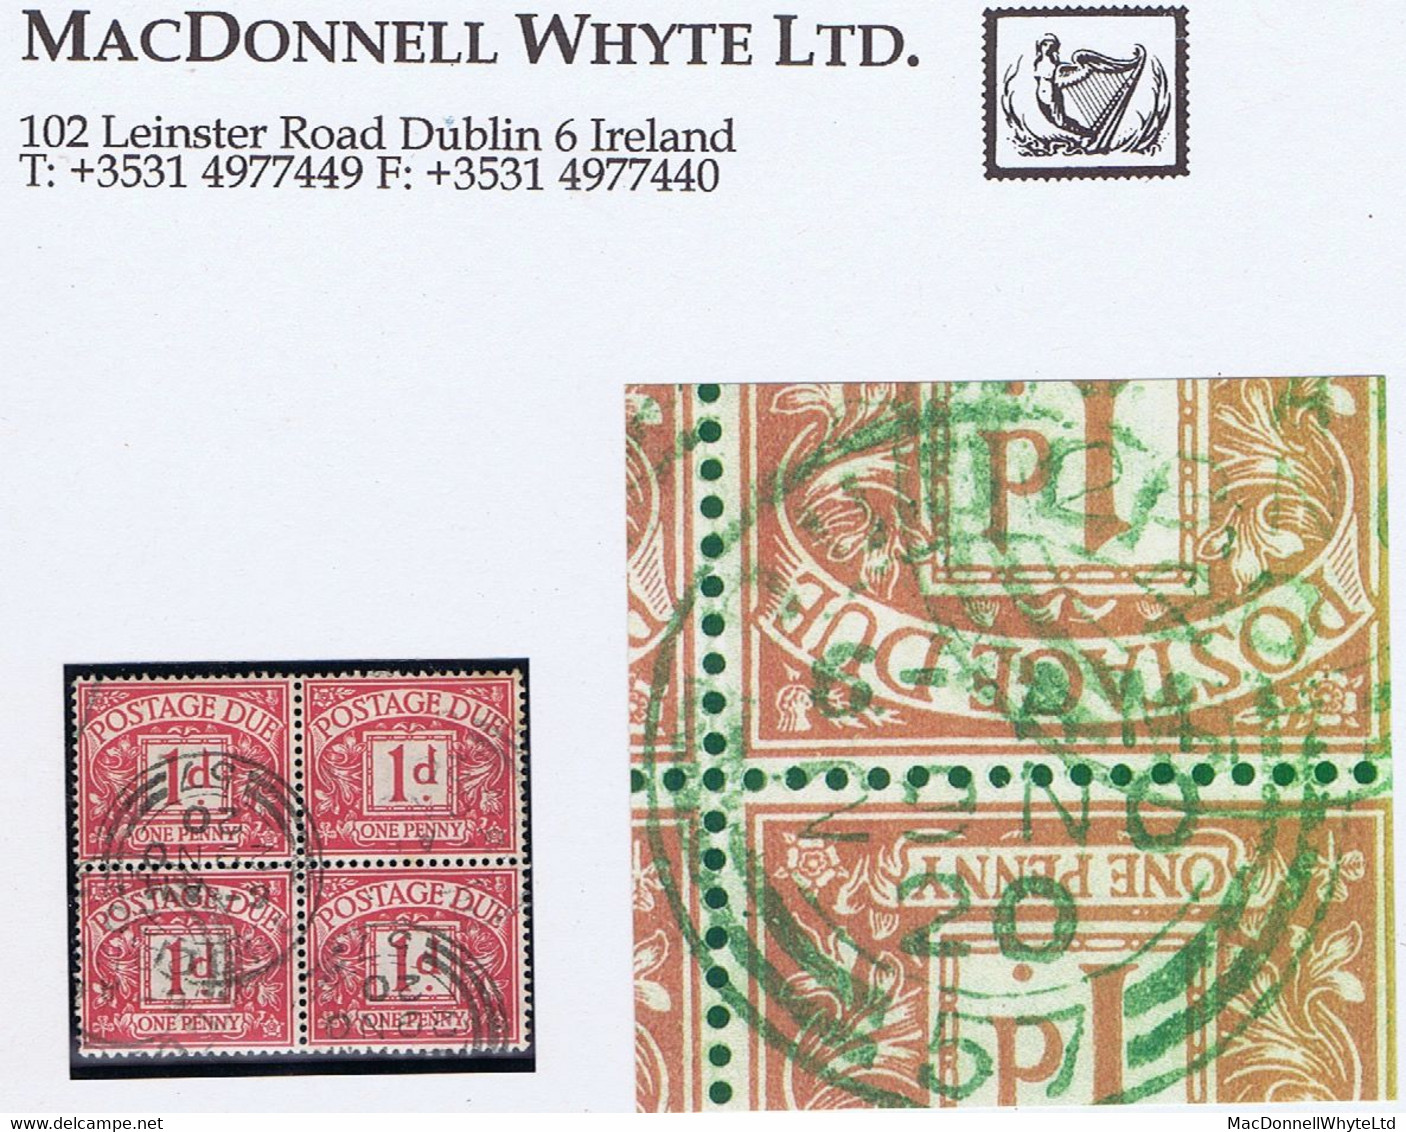 Ireland Postage Due 1920 British POSTAGE DUE 1d Block Of 4 Used With Cds DUBLIN 29 NO 20 Code 57 - Postage Due